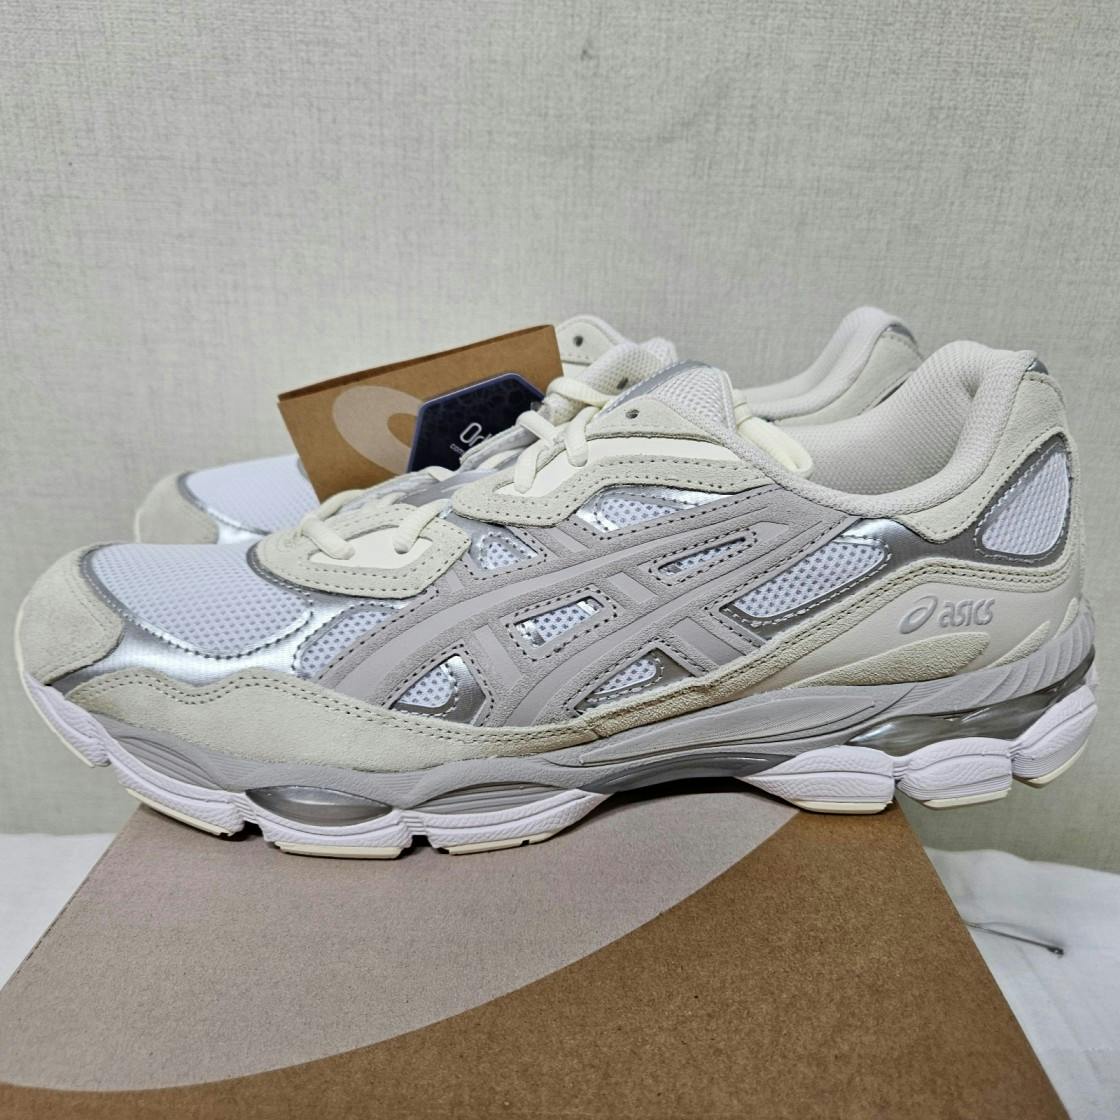 ASICS Gel NYC 'White Oyster Grey' 1201A789‑105 - 1201A789-105